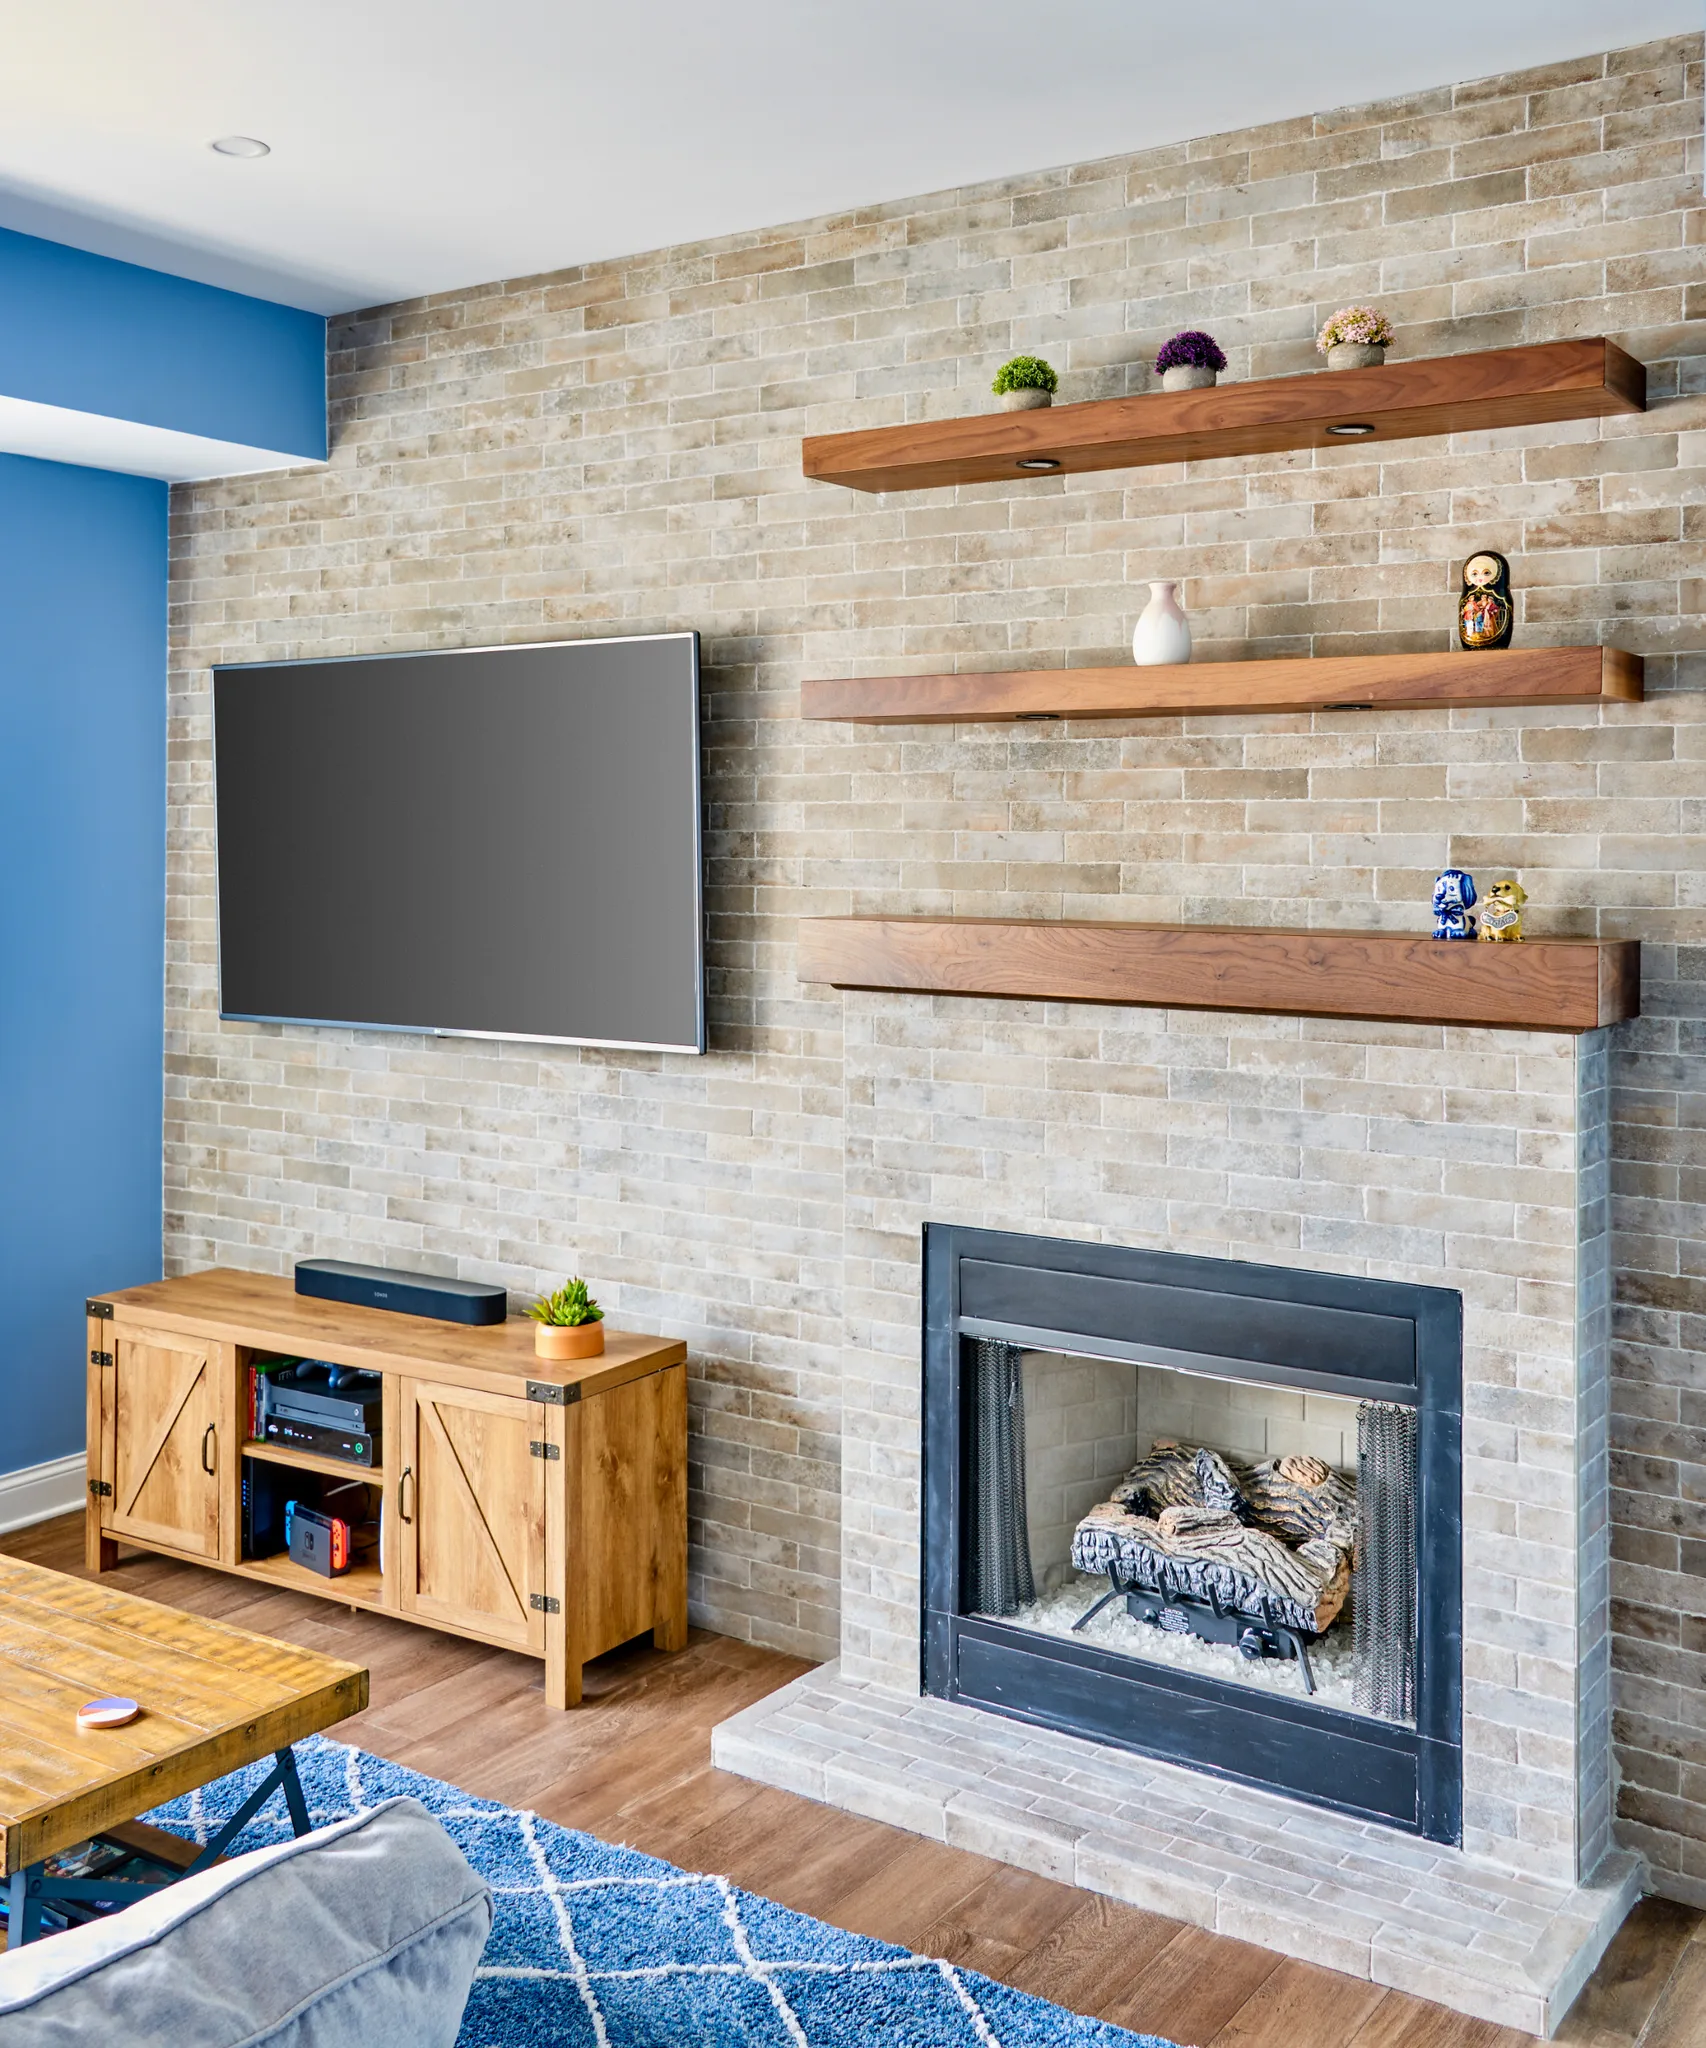 Fireplace and shelves